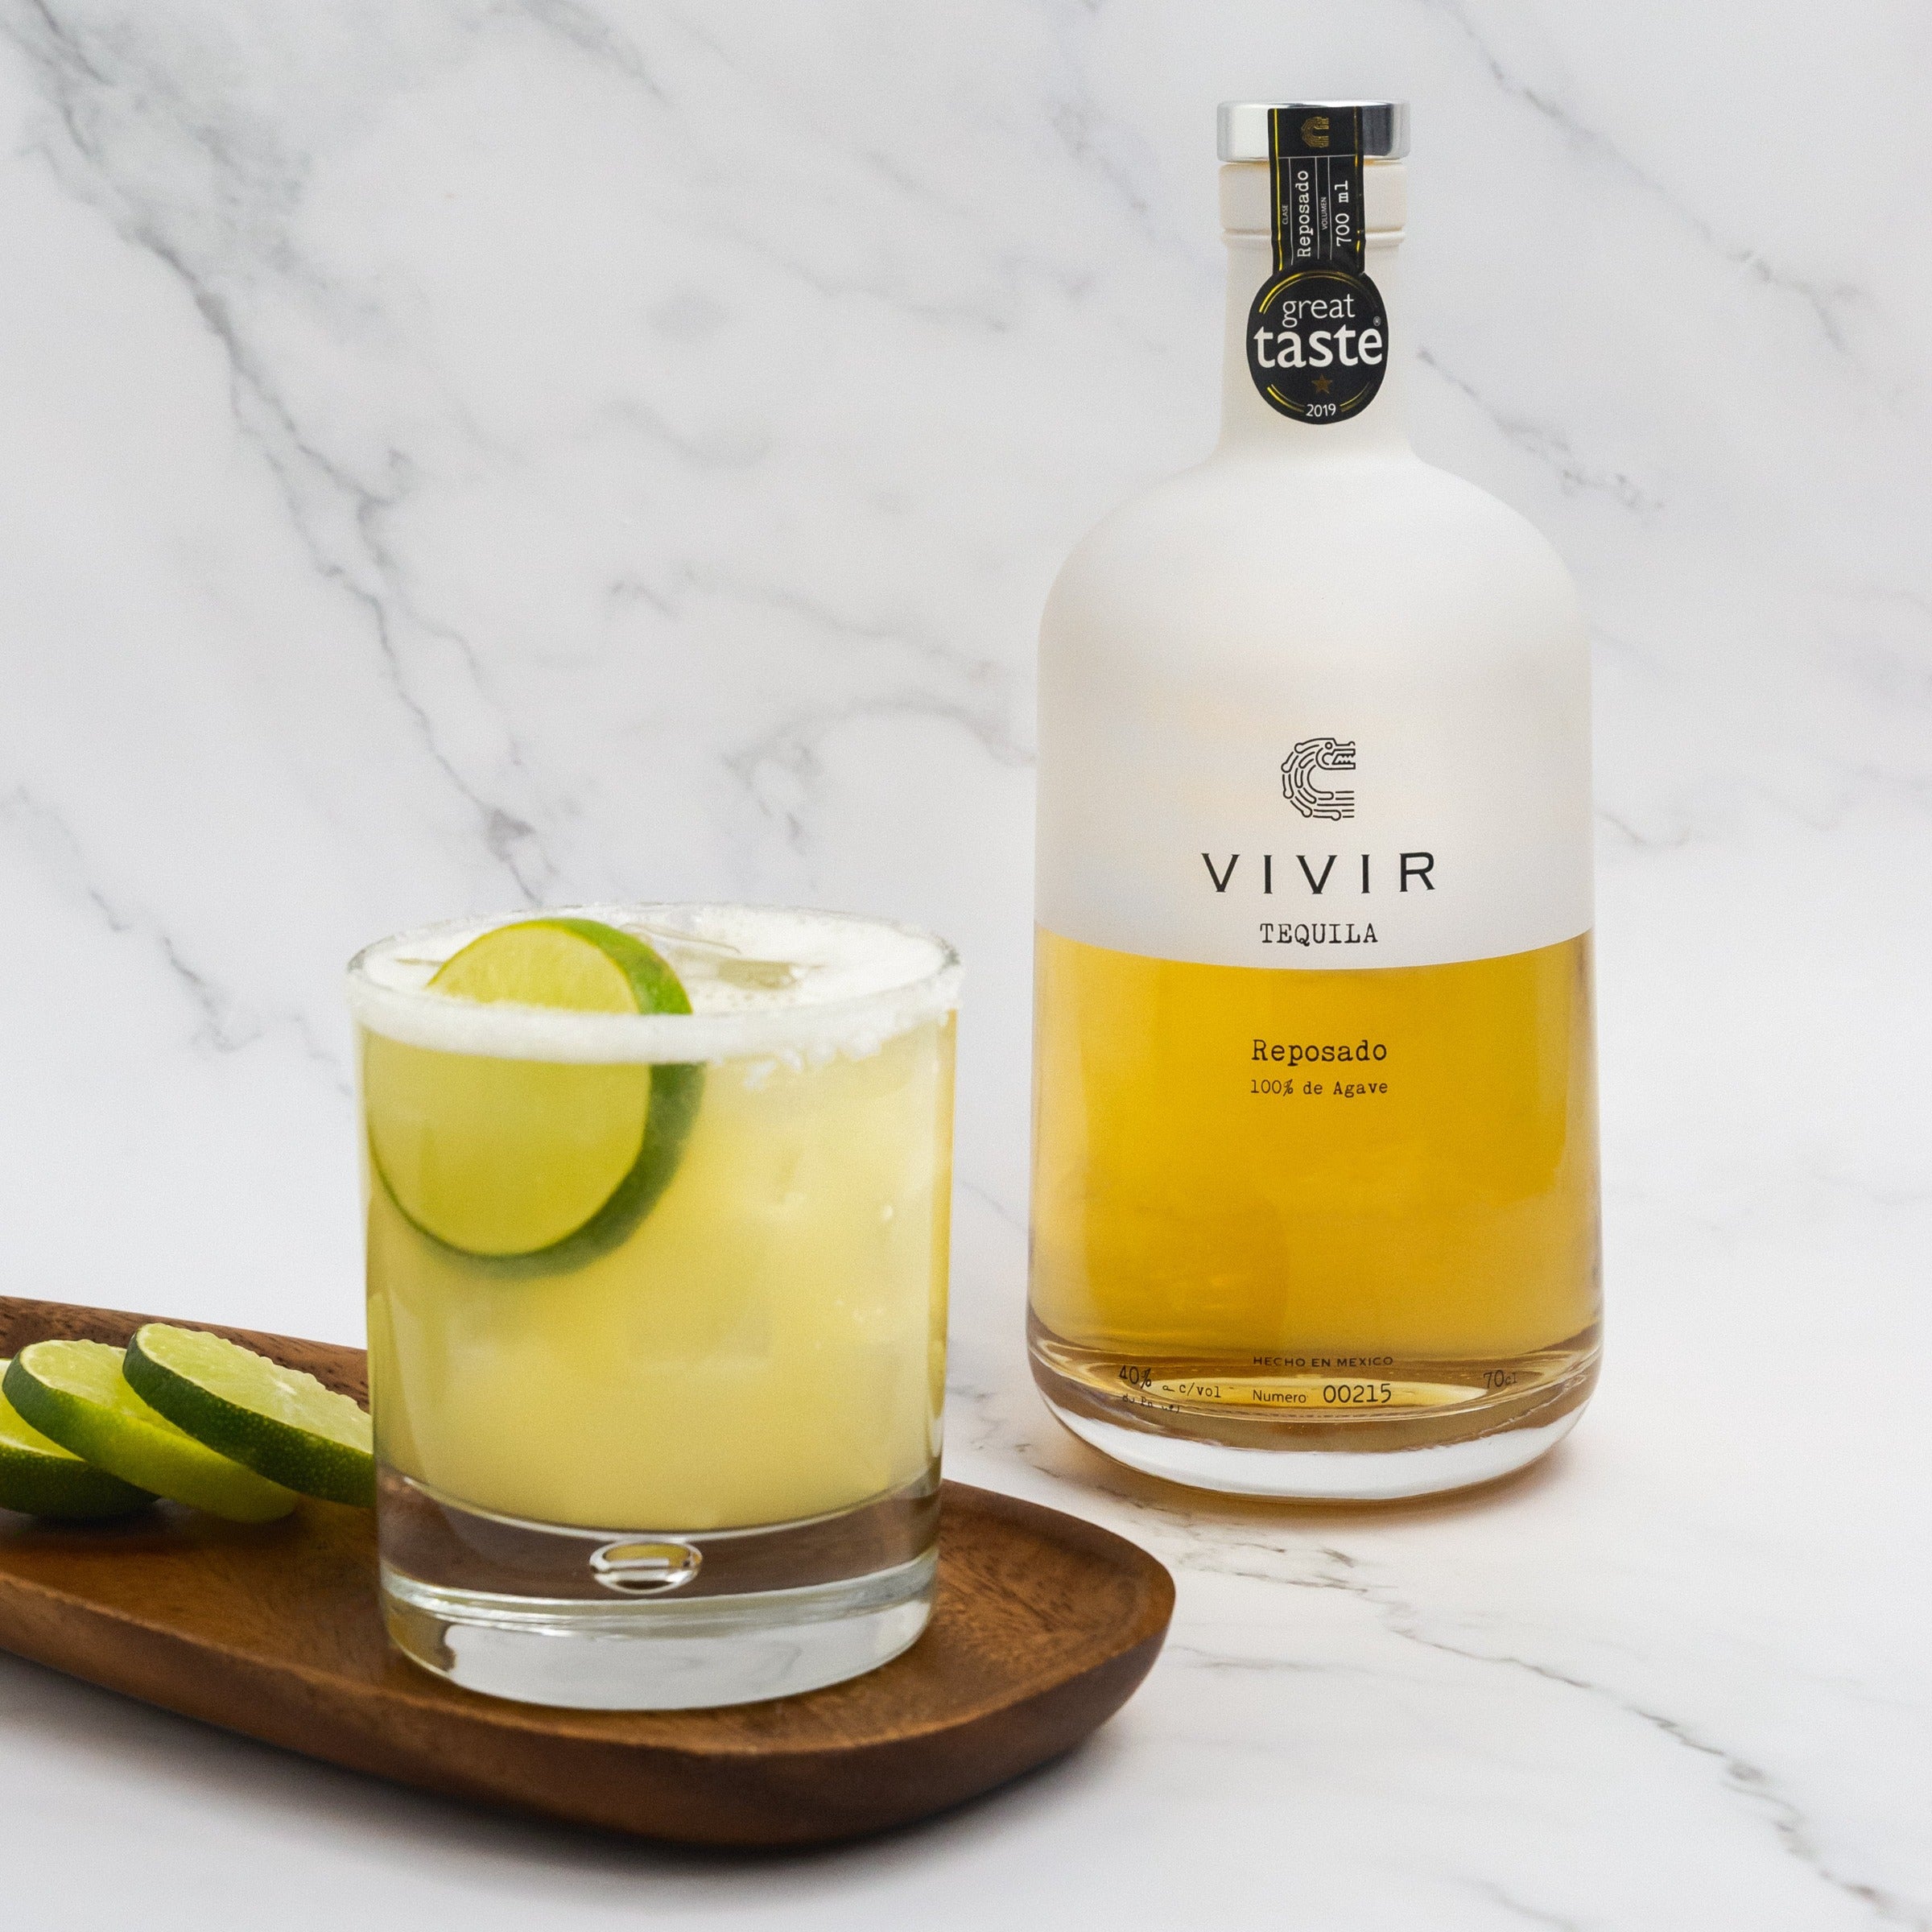 A bottle of VIVIR Tequila Reposado is positioned next to a Margarita cocktail in a tumbler glass with a lime wheel garnish.